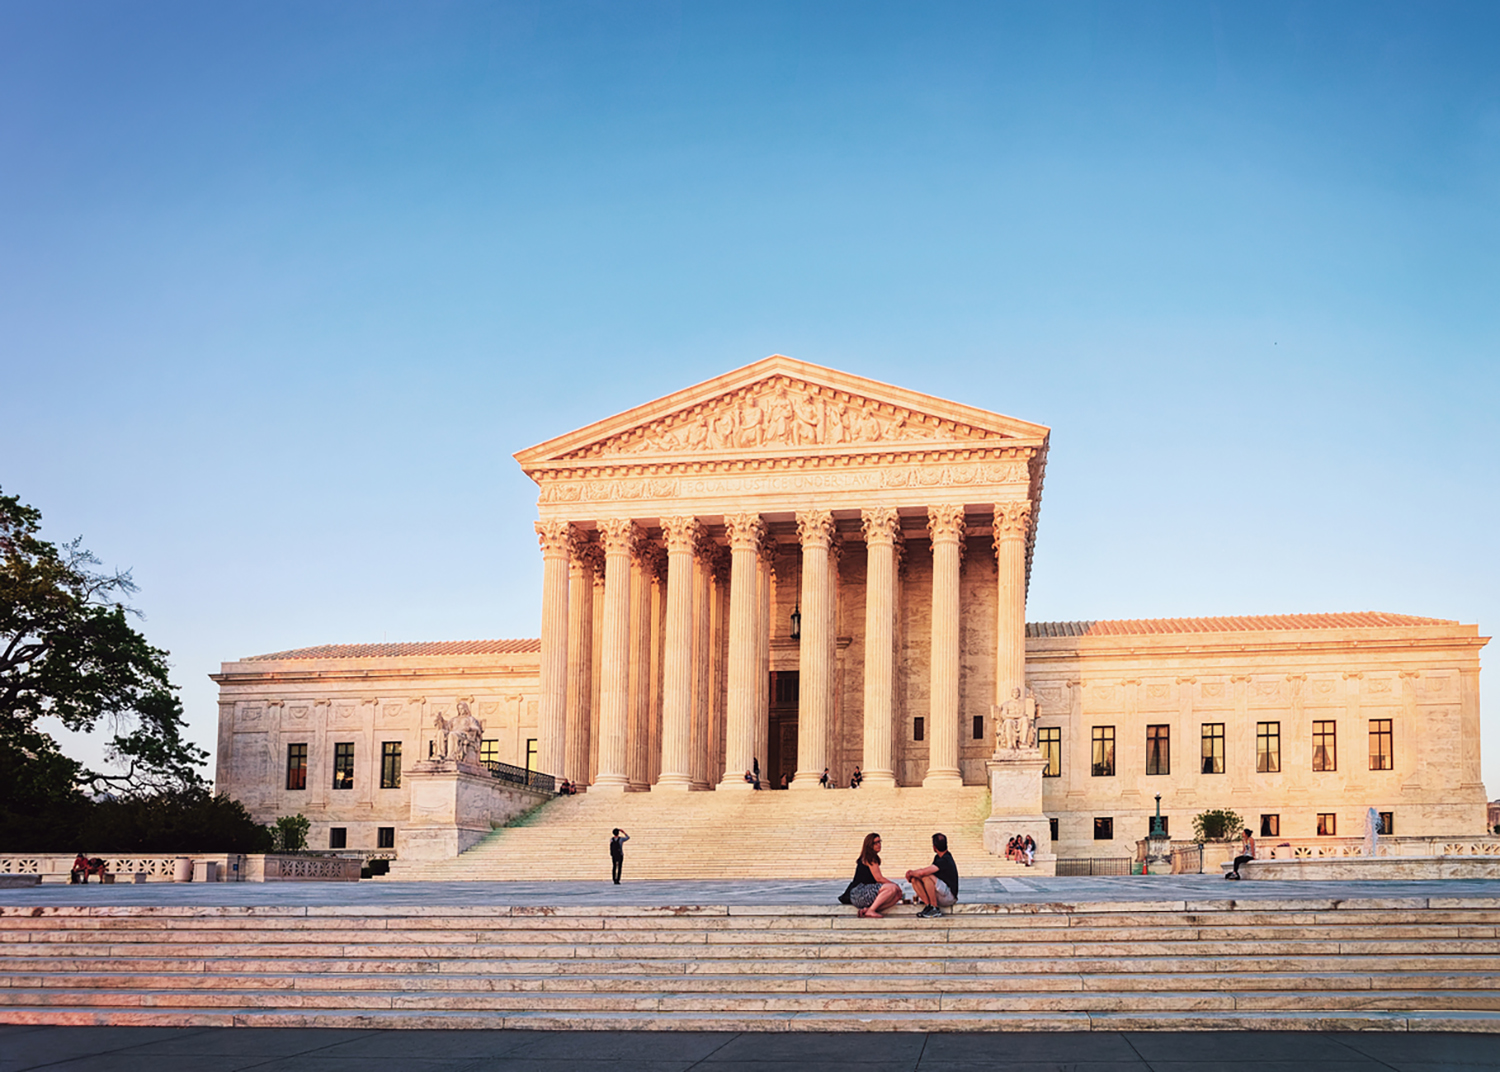 U.S. Supreme Court building with people sitting on the steps and others in the background.